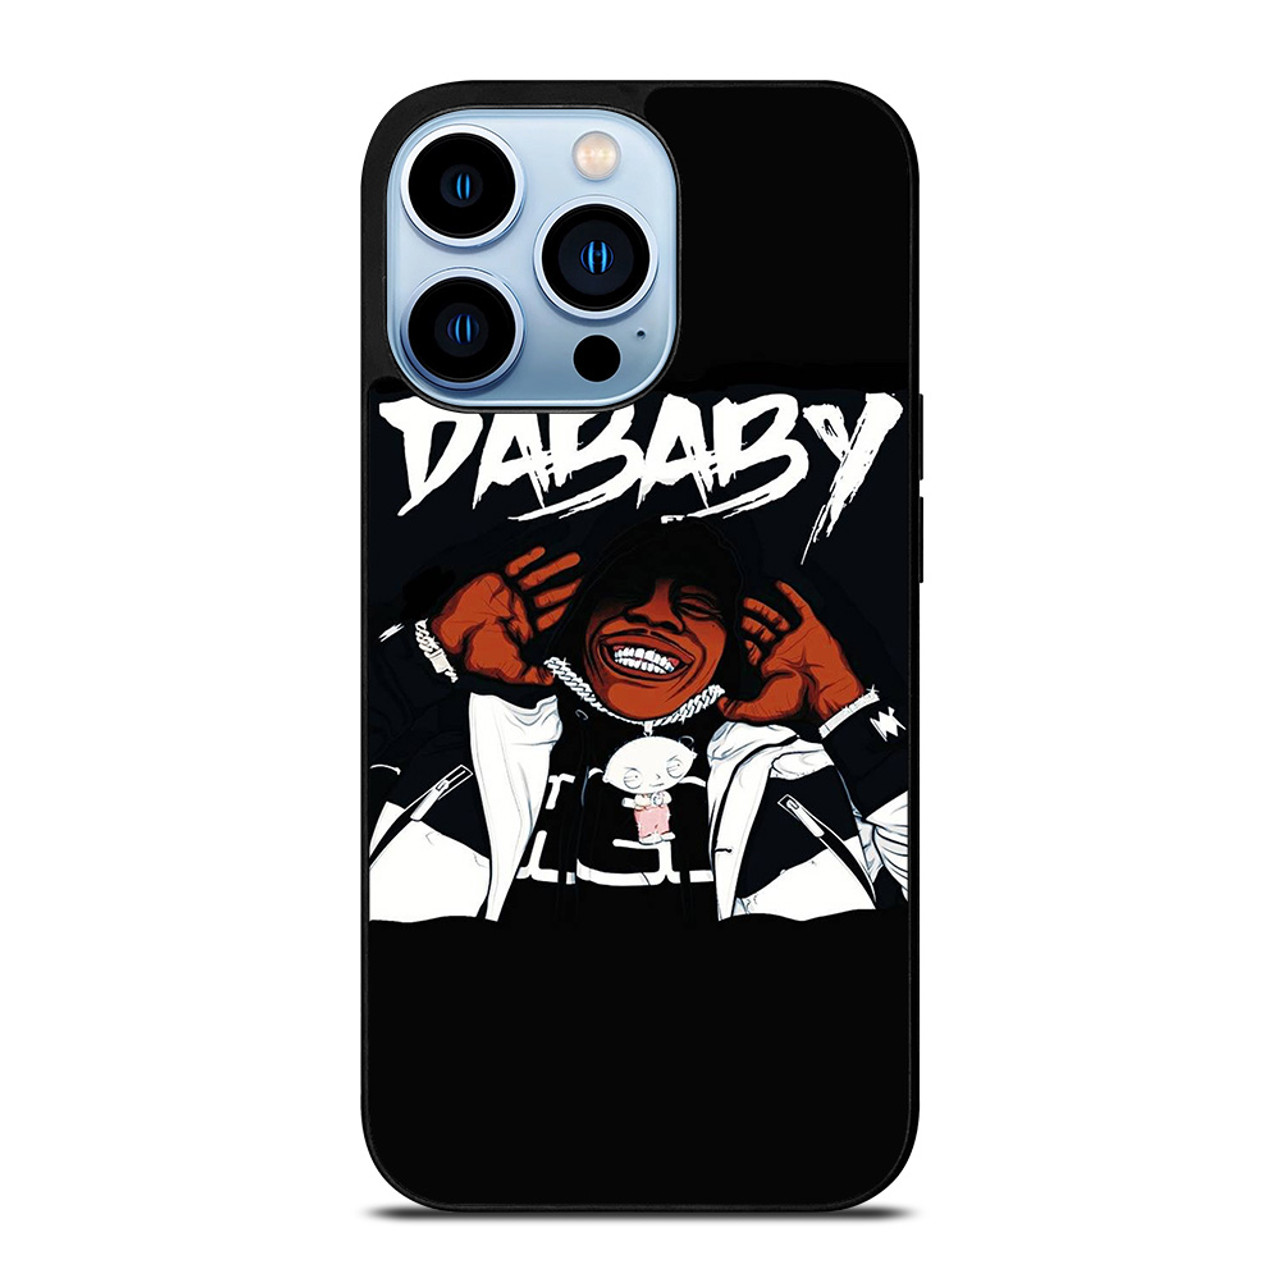 Baby on Baby Dababy iPhone Case 8 Plus X Xr 11 Max Pro Max 